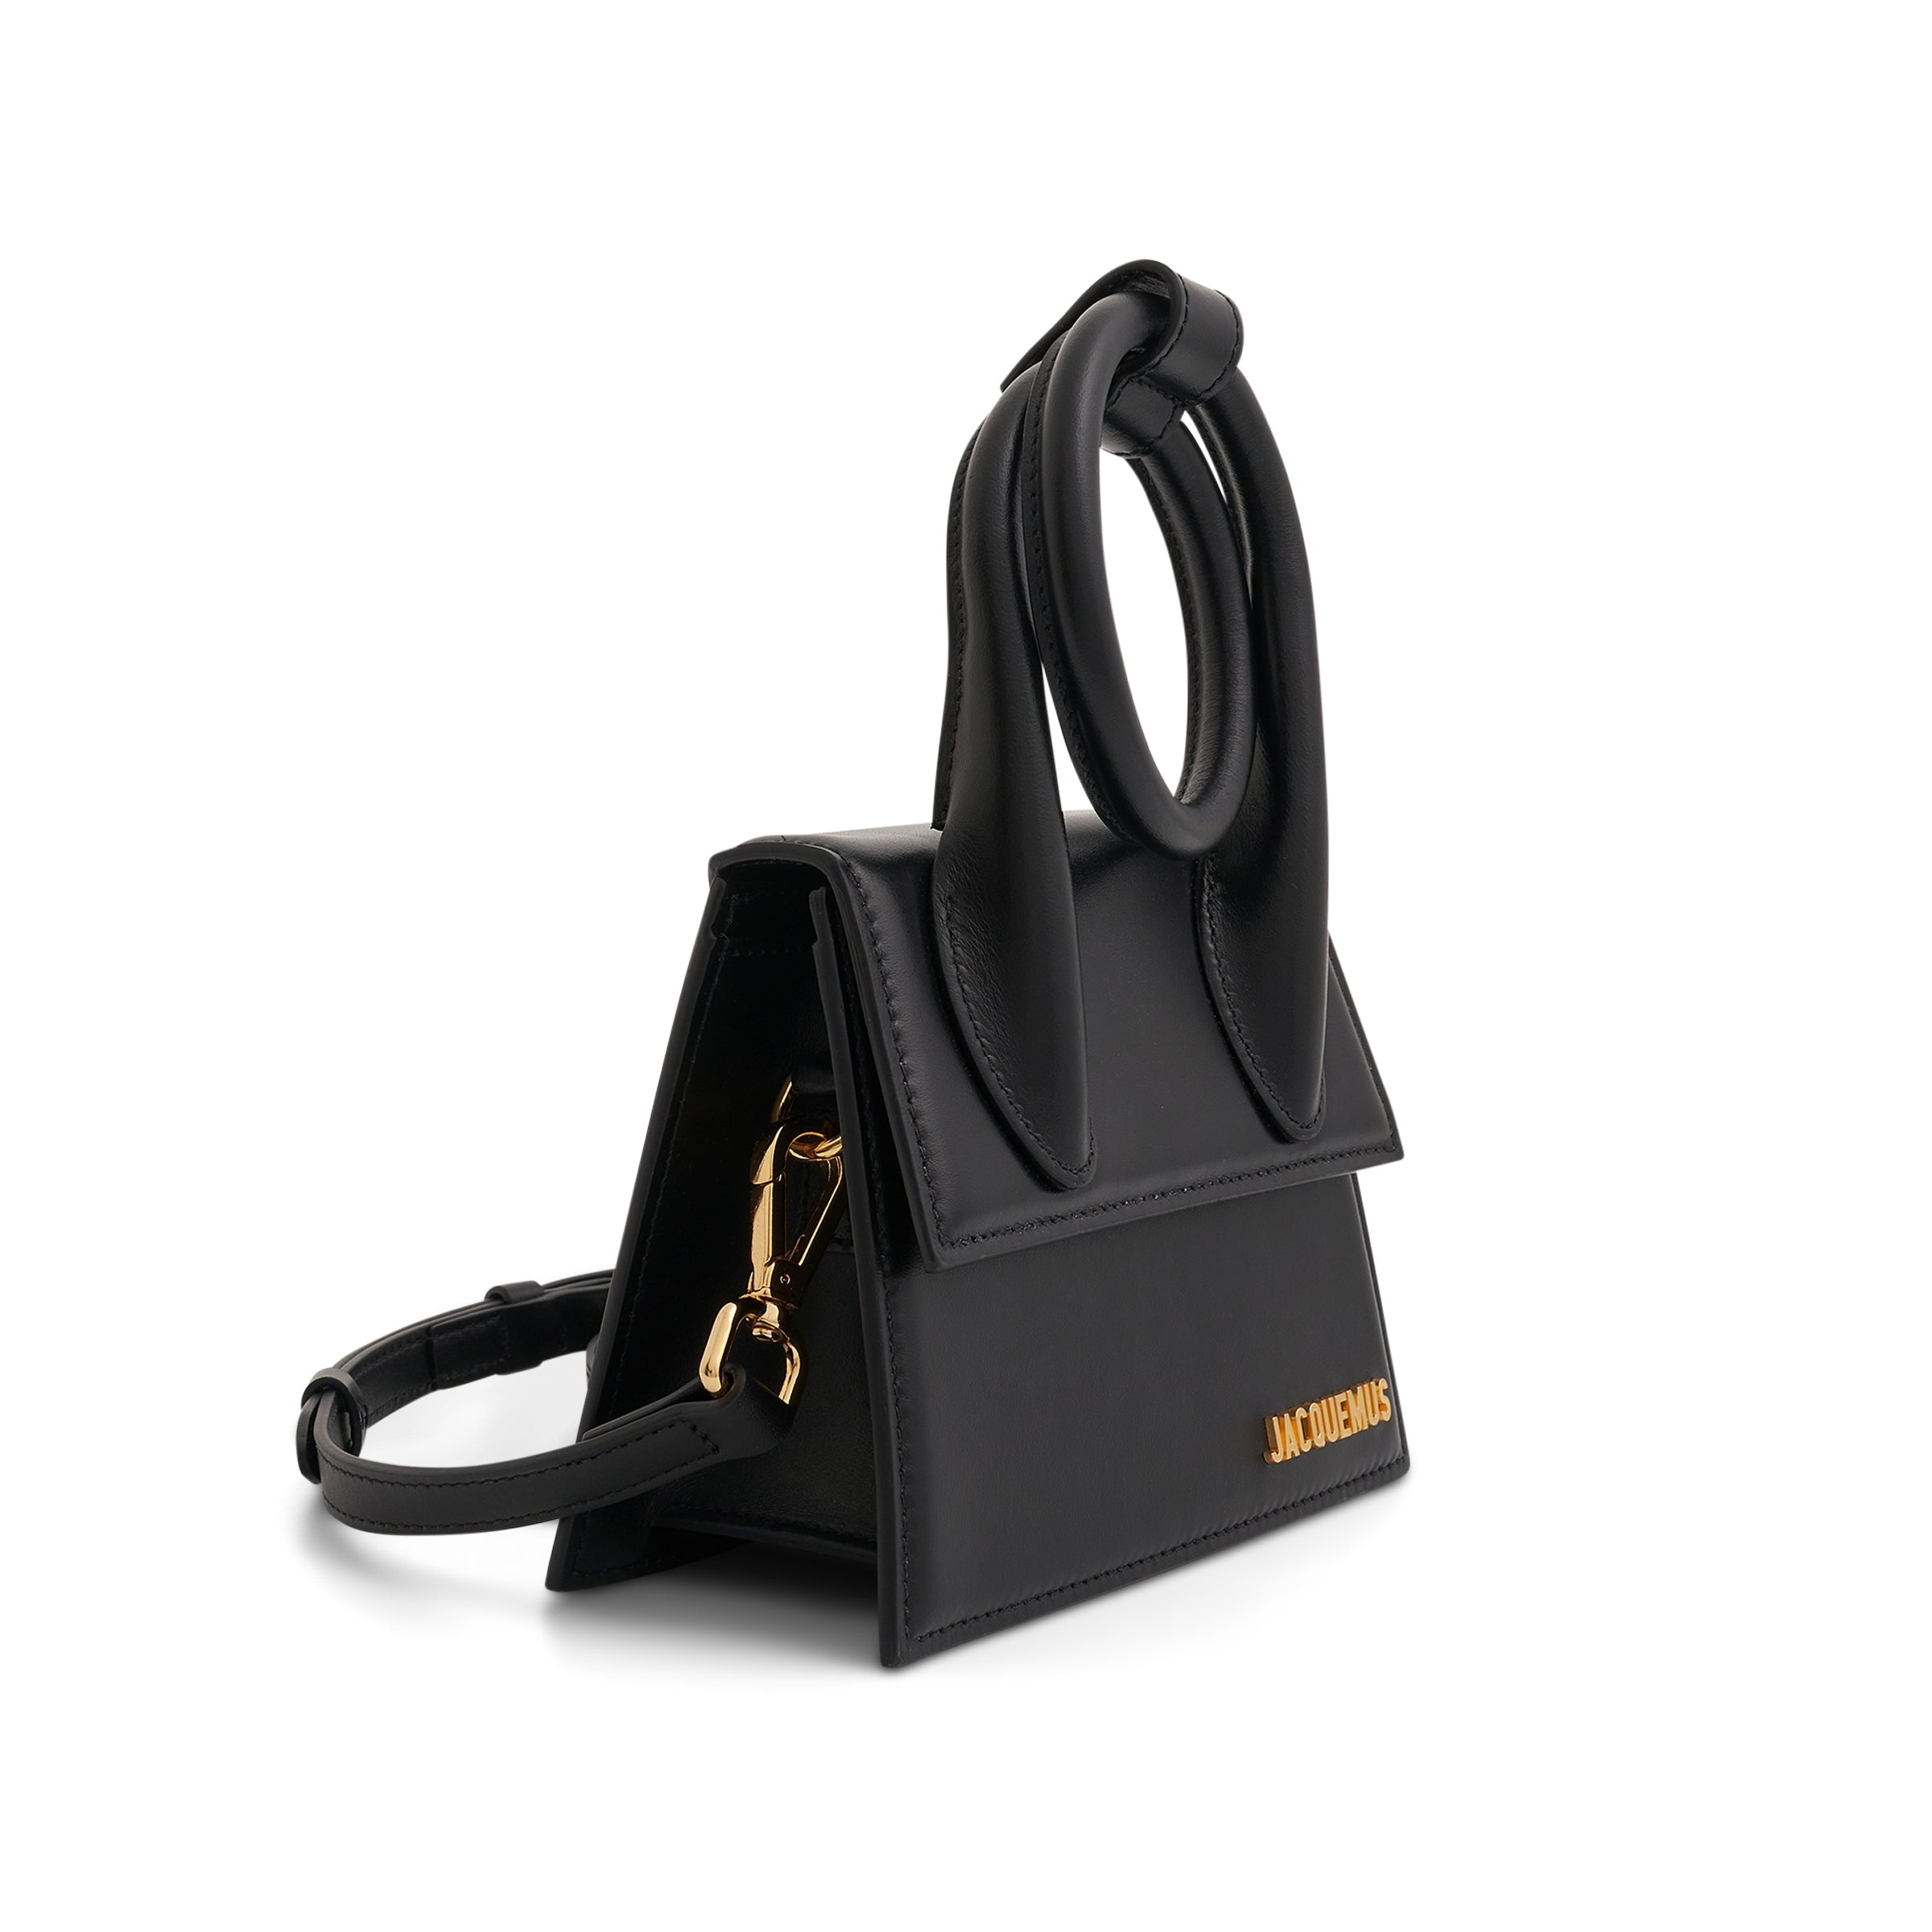 Le Chiquito Noeud Leather Bag in Black - 2